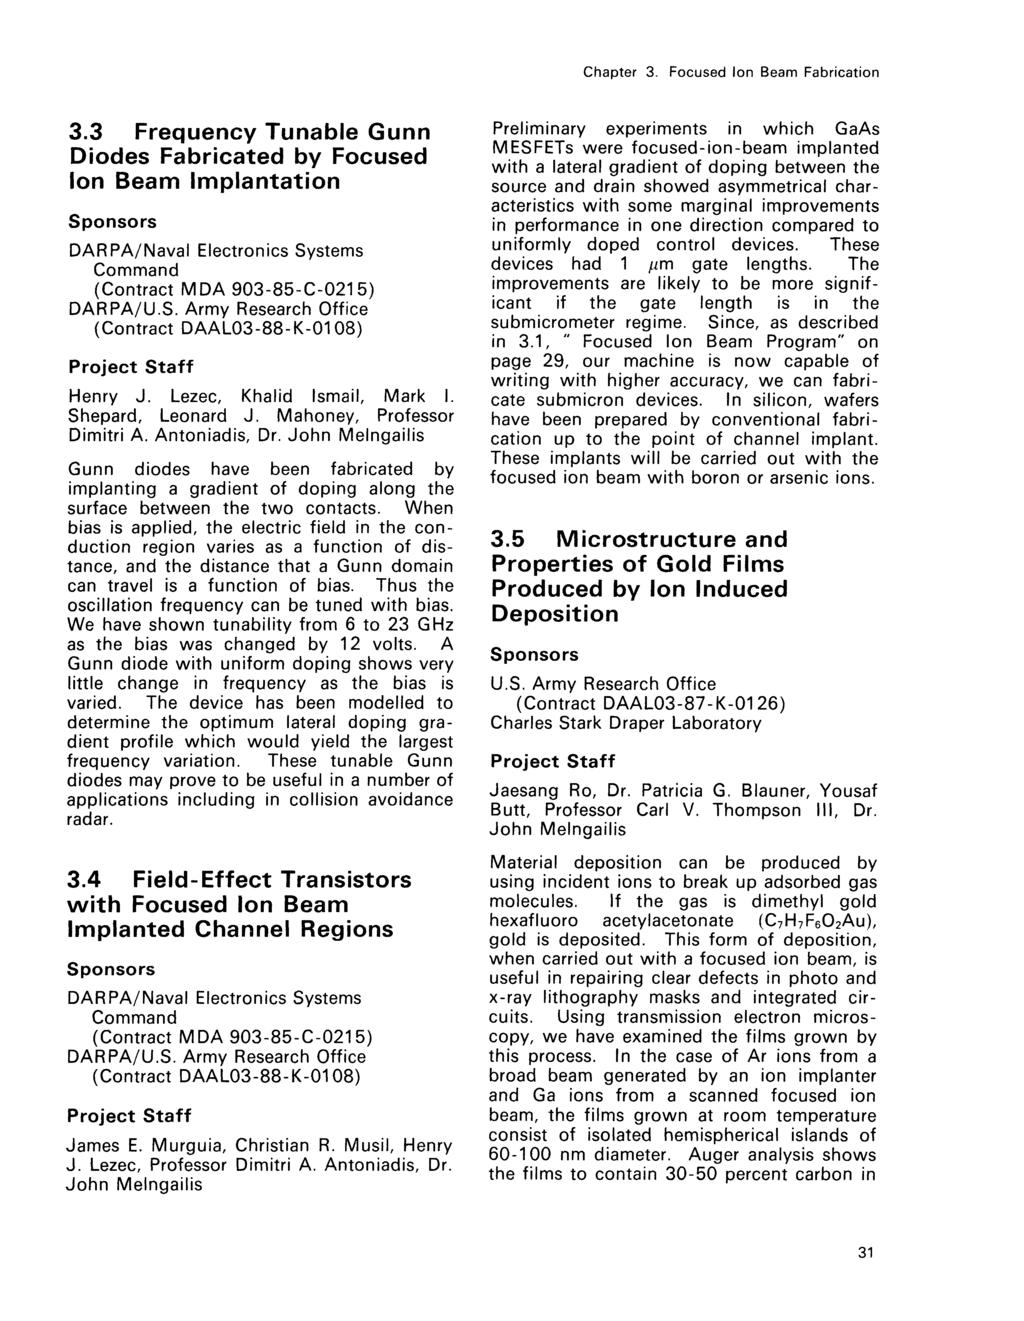 3.3 Frequency Tunable Gunn Diodes Fabricated by Focused Ion Beam Implantation DARPA/Naval Electronics Systems Command (Contract MDA 903-85-C-0215) DARPA/U.S. Army Research Office (Contract DAAL03-88-K-01 08) Henry J.